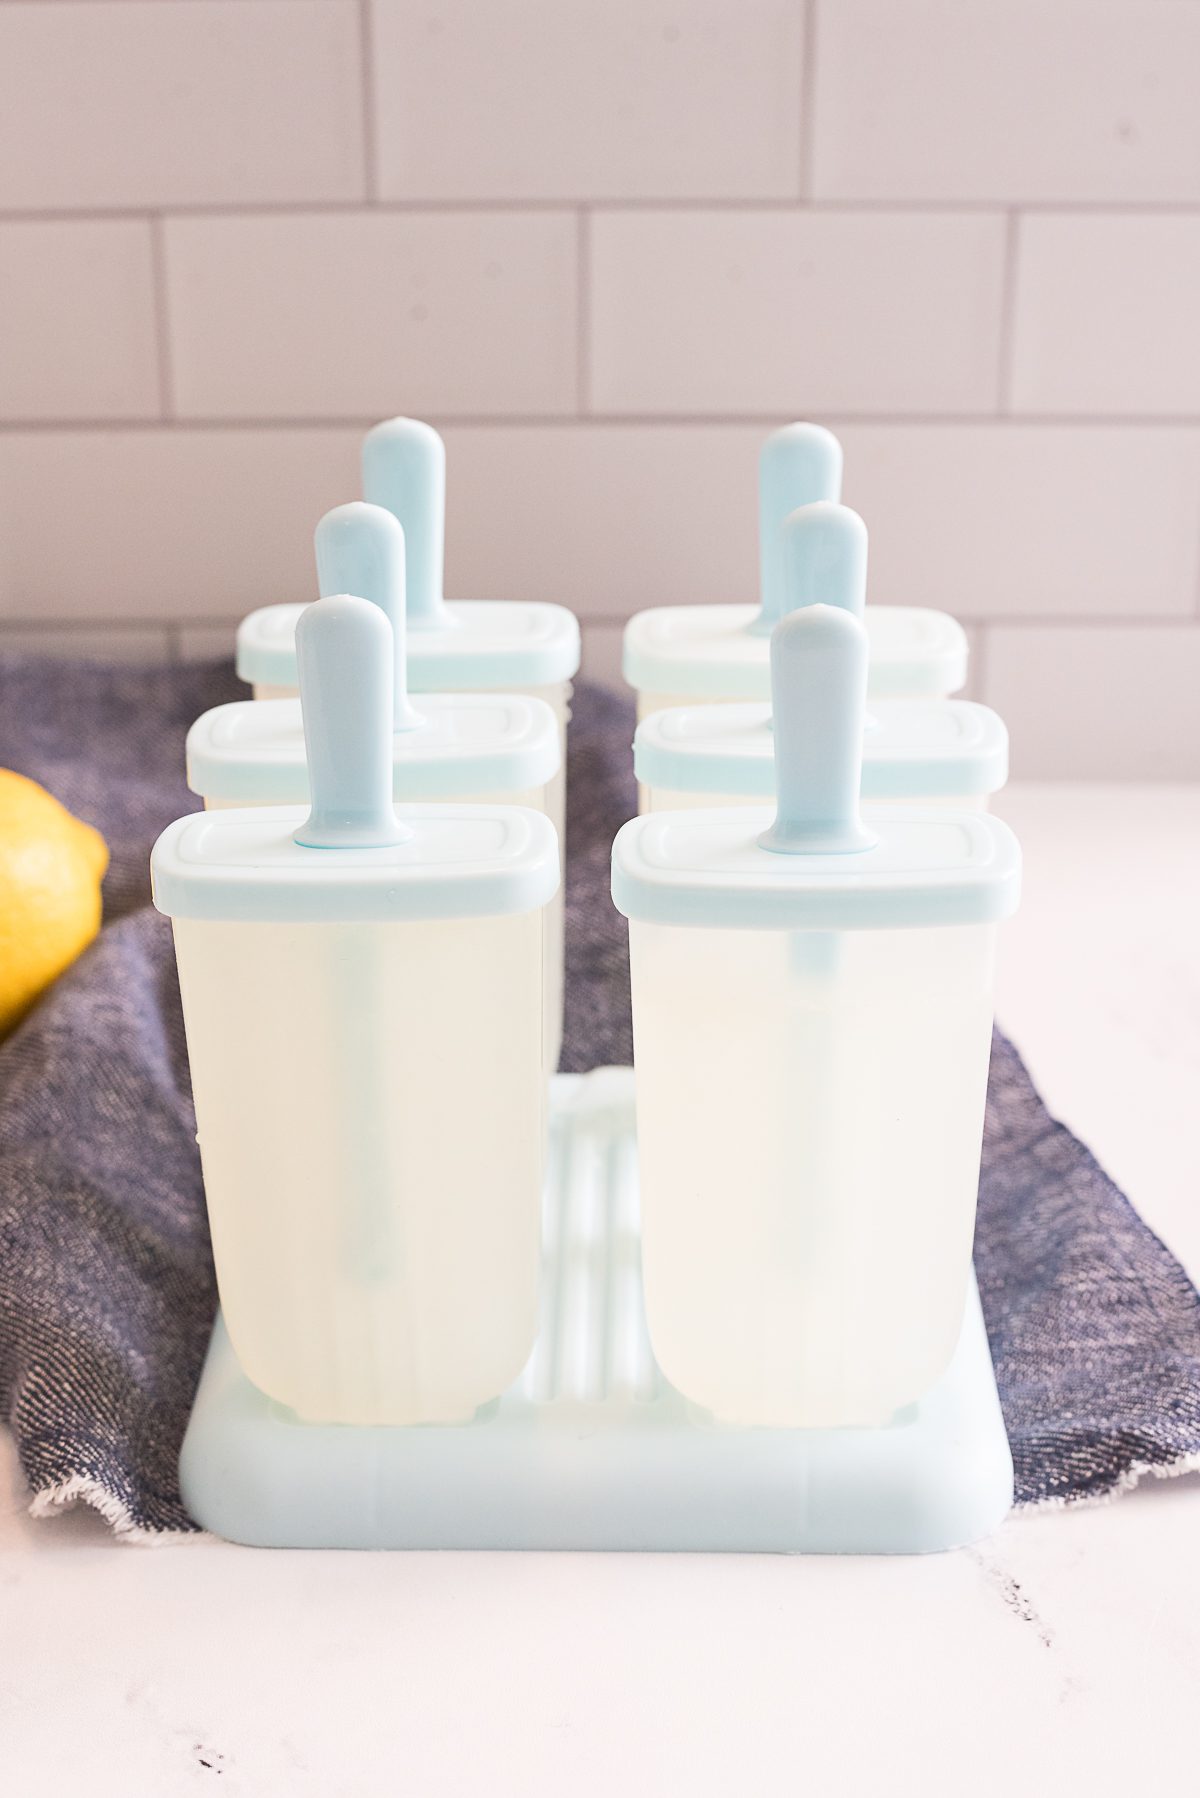 popsicles made with simply lemonade